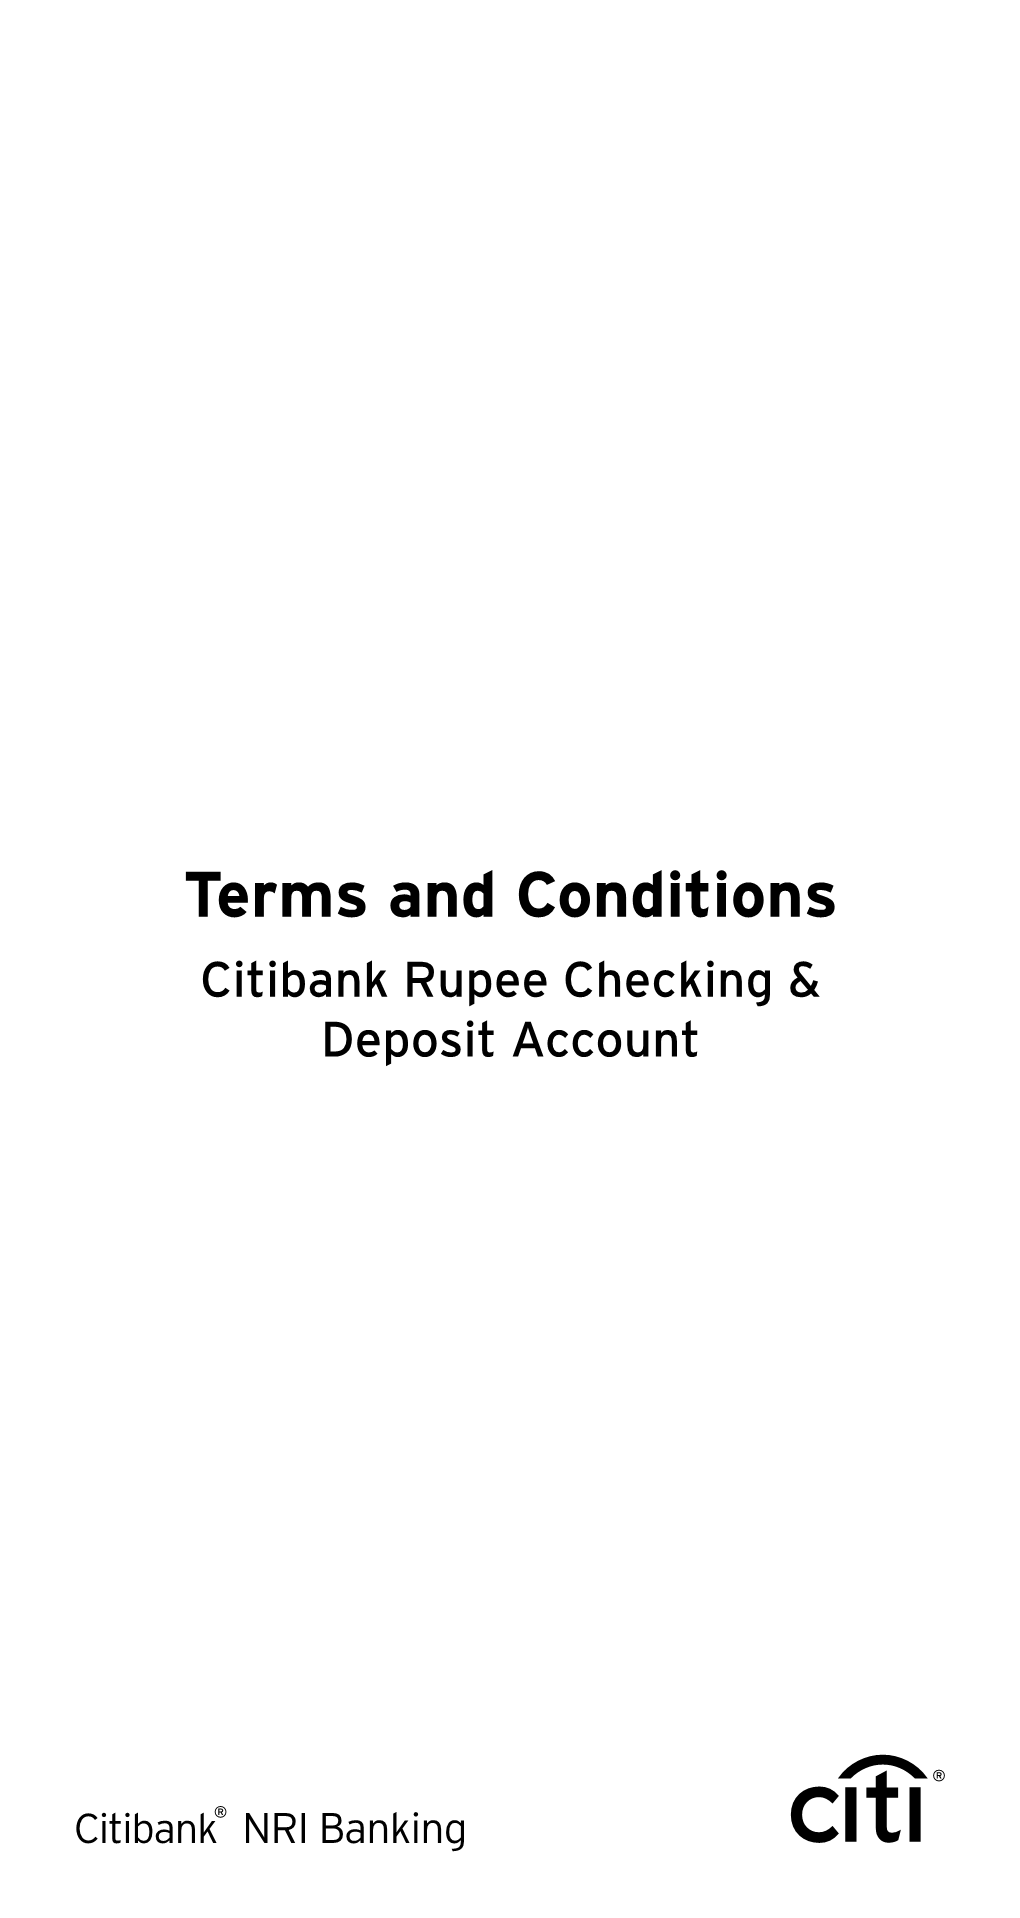 Terms and Conditions Citibank Rupee Checking & Deposit Account CITIBANK RUPEE CHECKING & DEPOSIT ACCOUNT TERMS and CONDITIONS